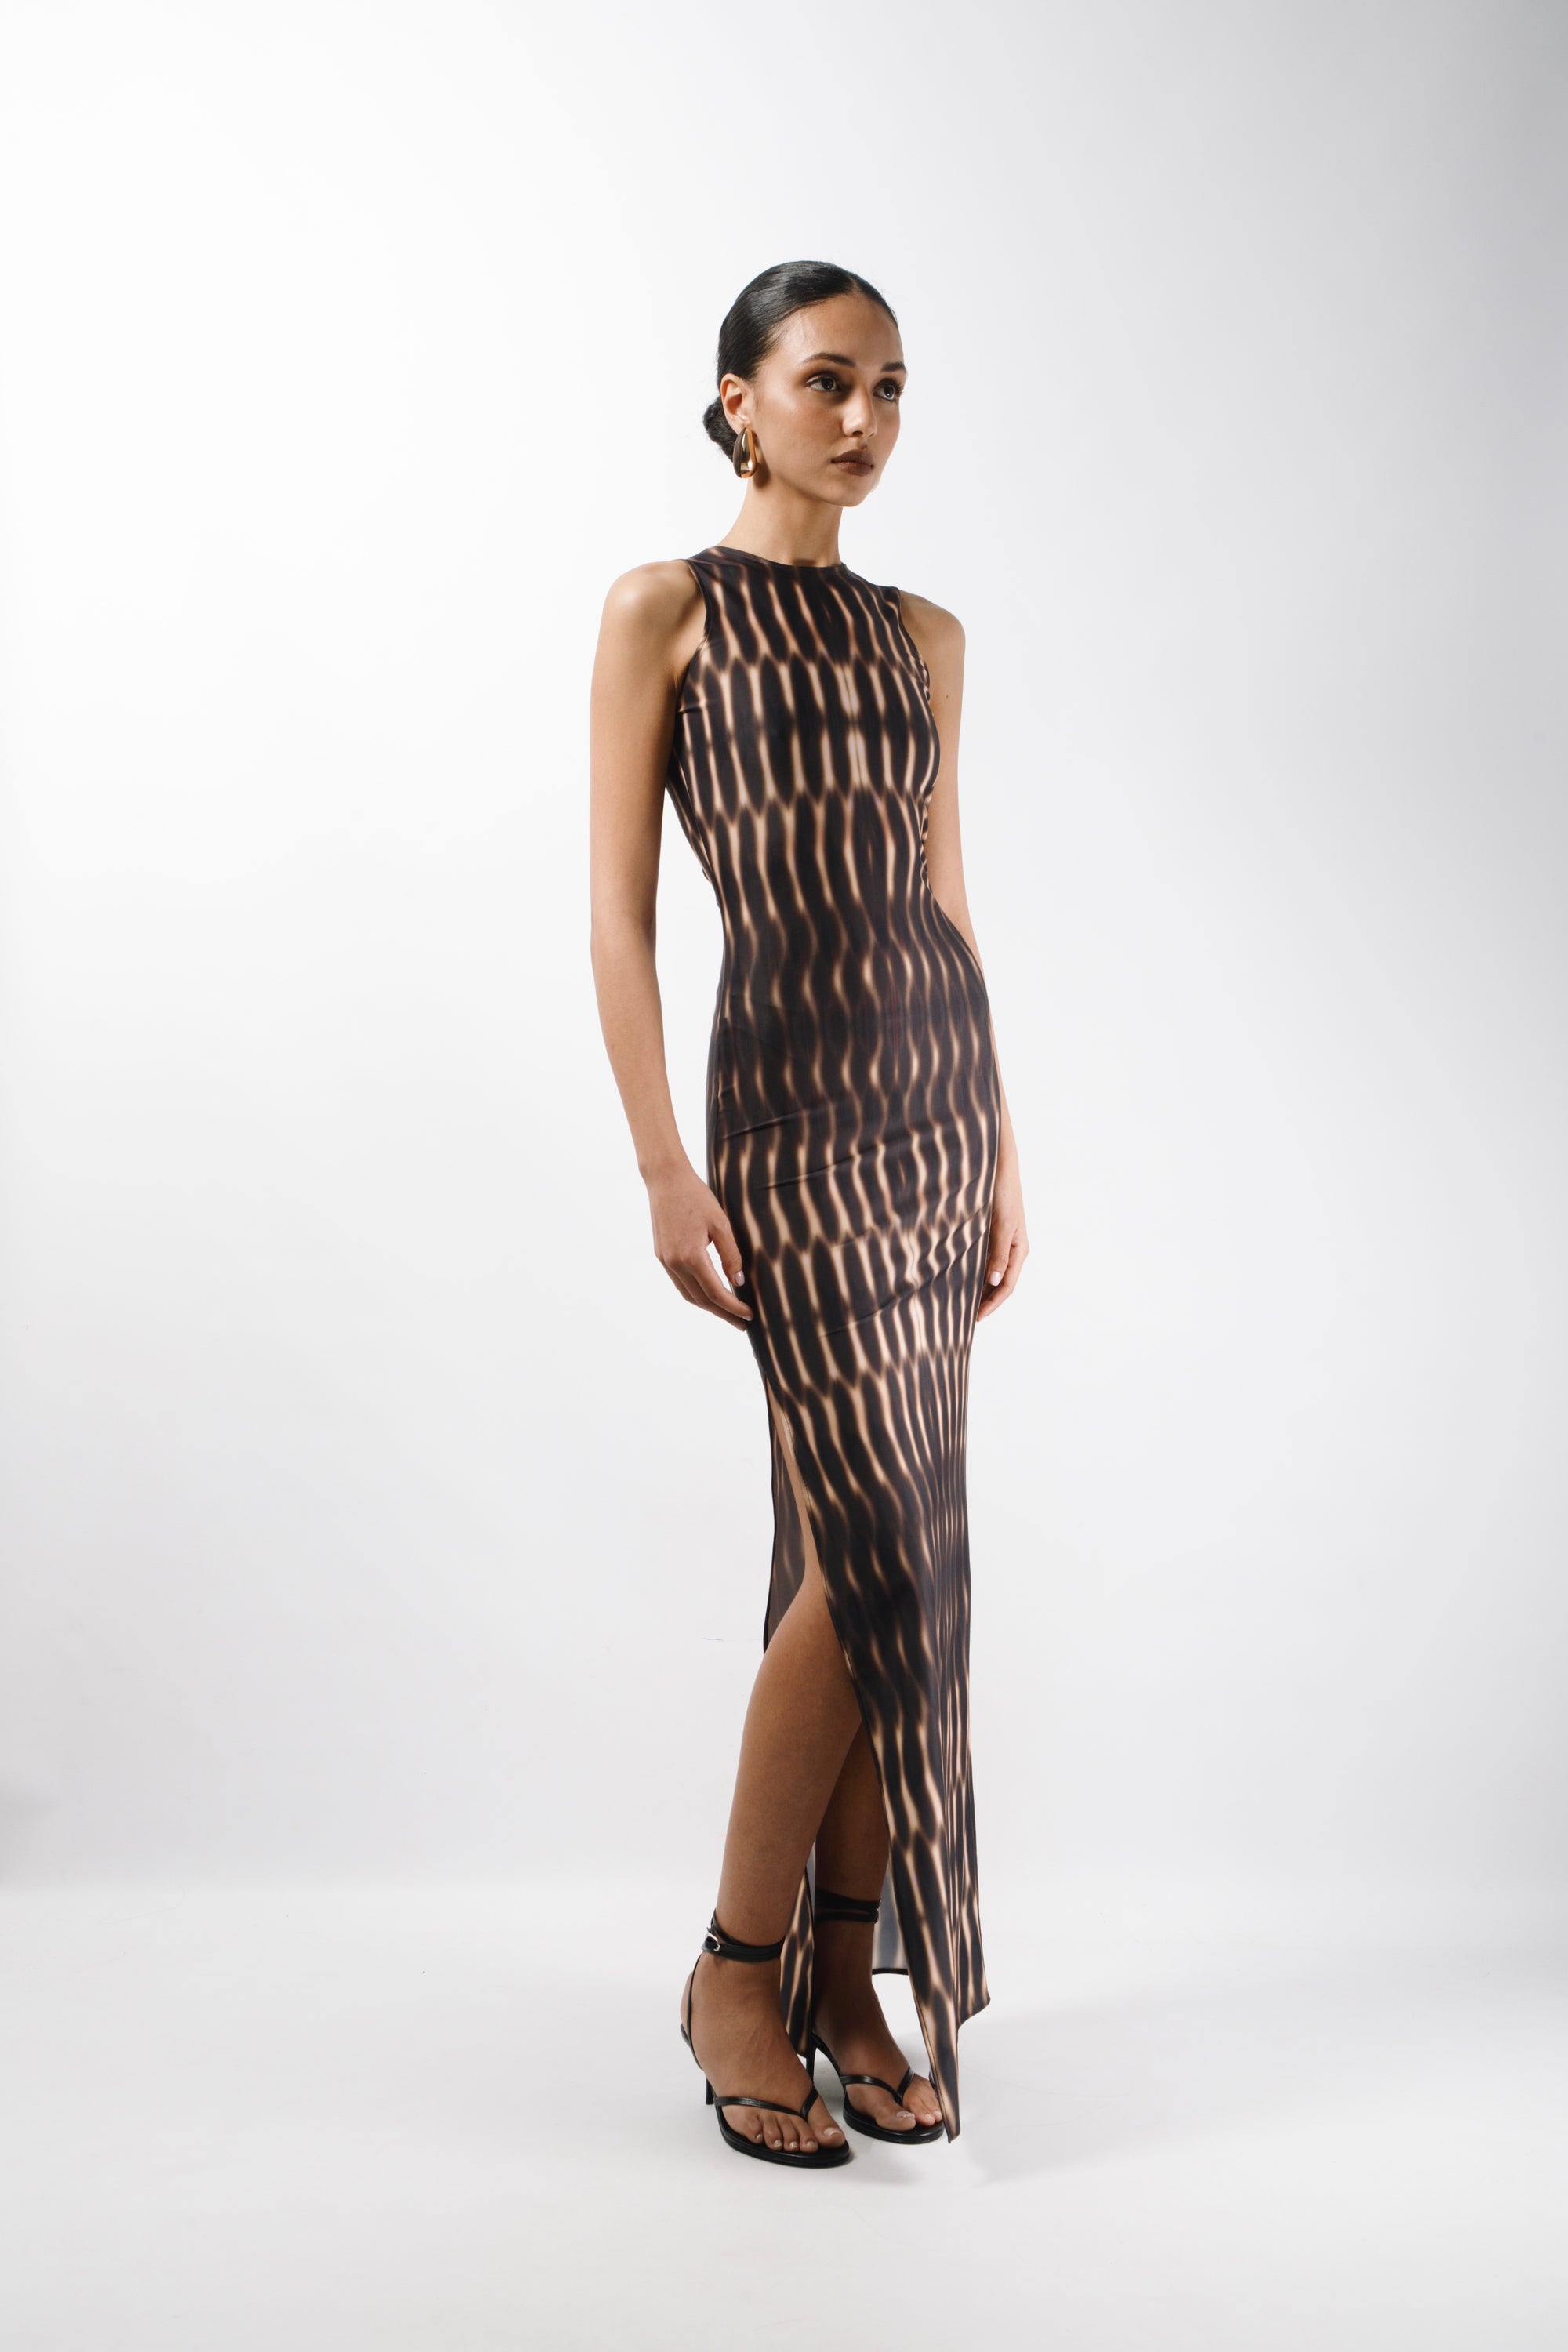  Melo gold dress in printed jersey stretch made from recycled plastic bottles, with a straight silhouette that hits at the ankle - side